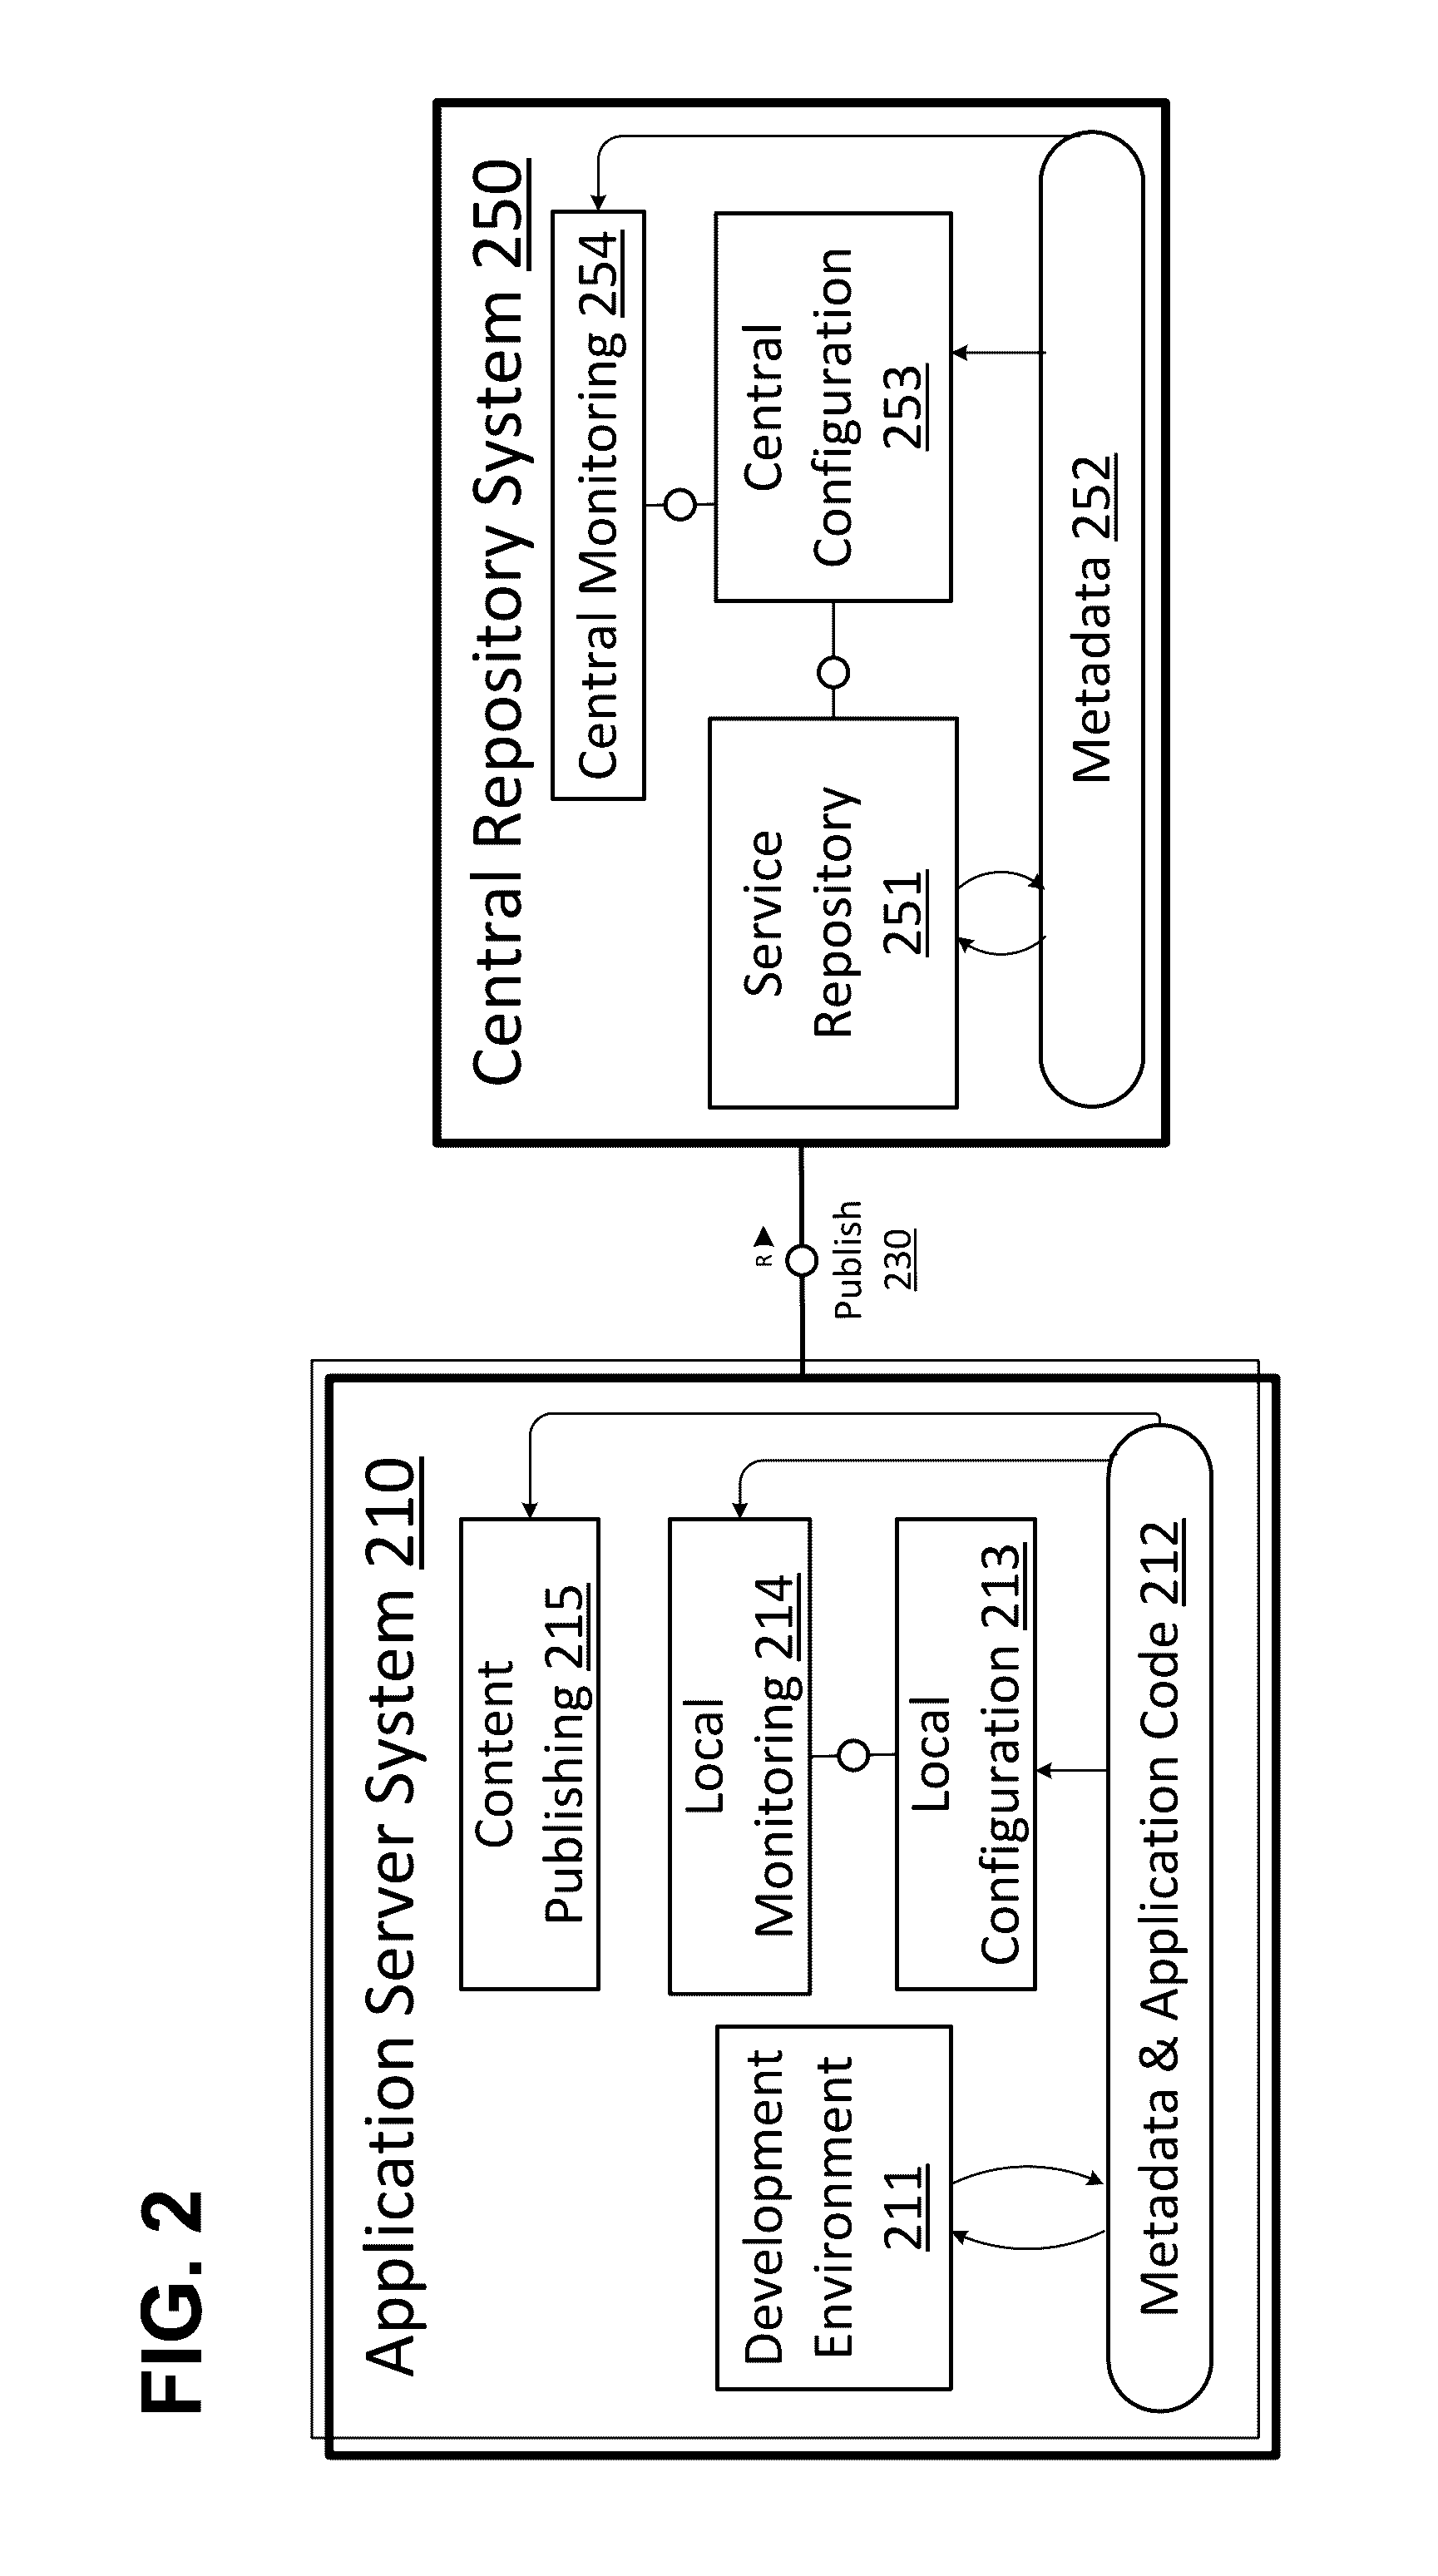 Method for determining a supported connectivity between applications